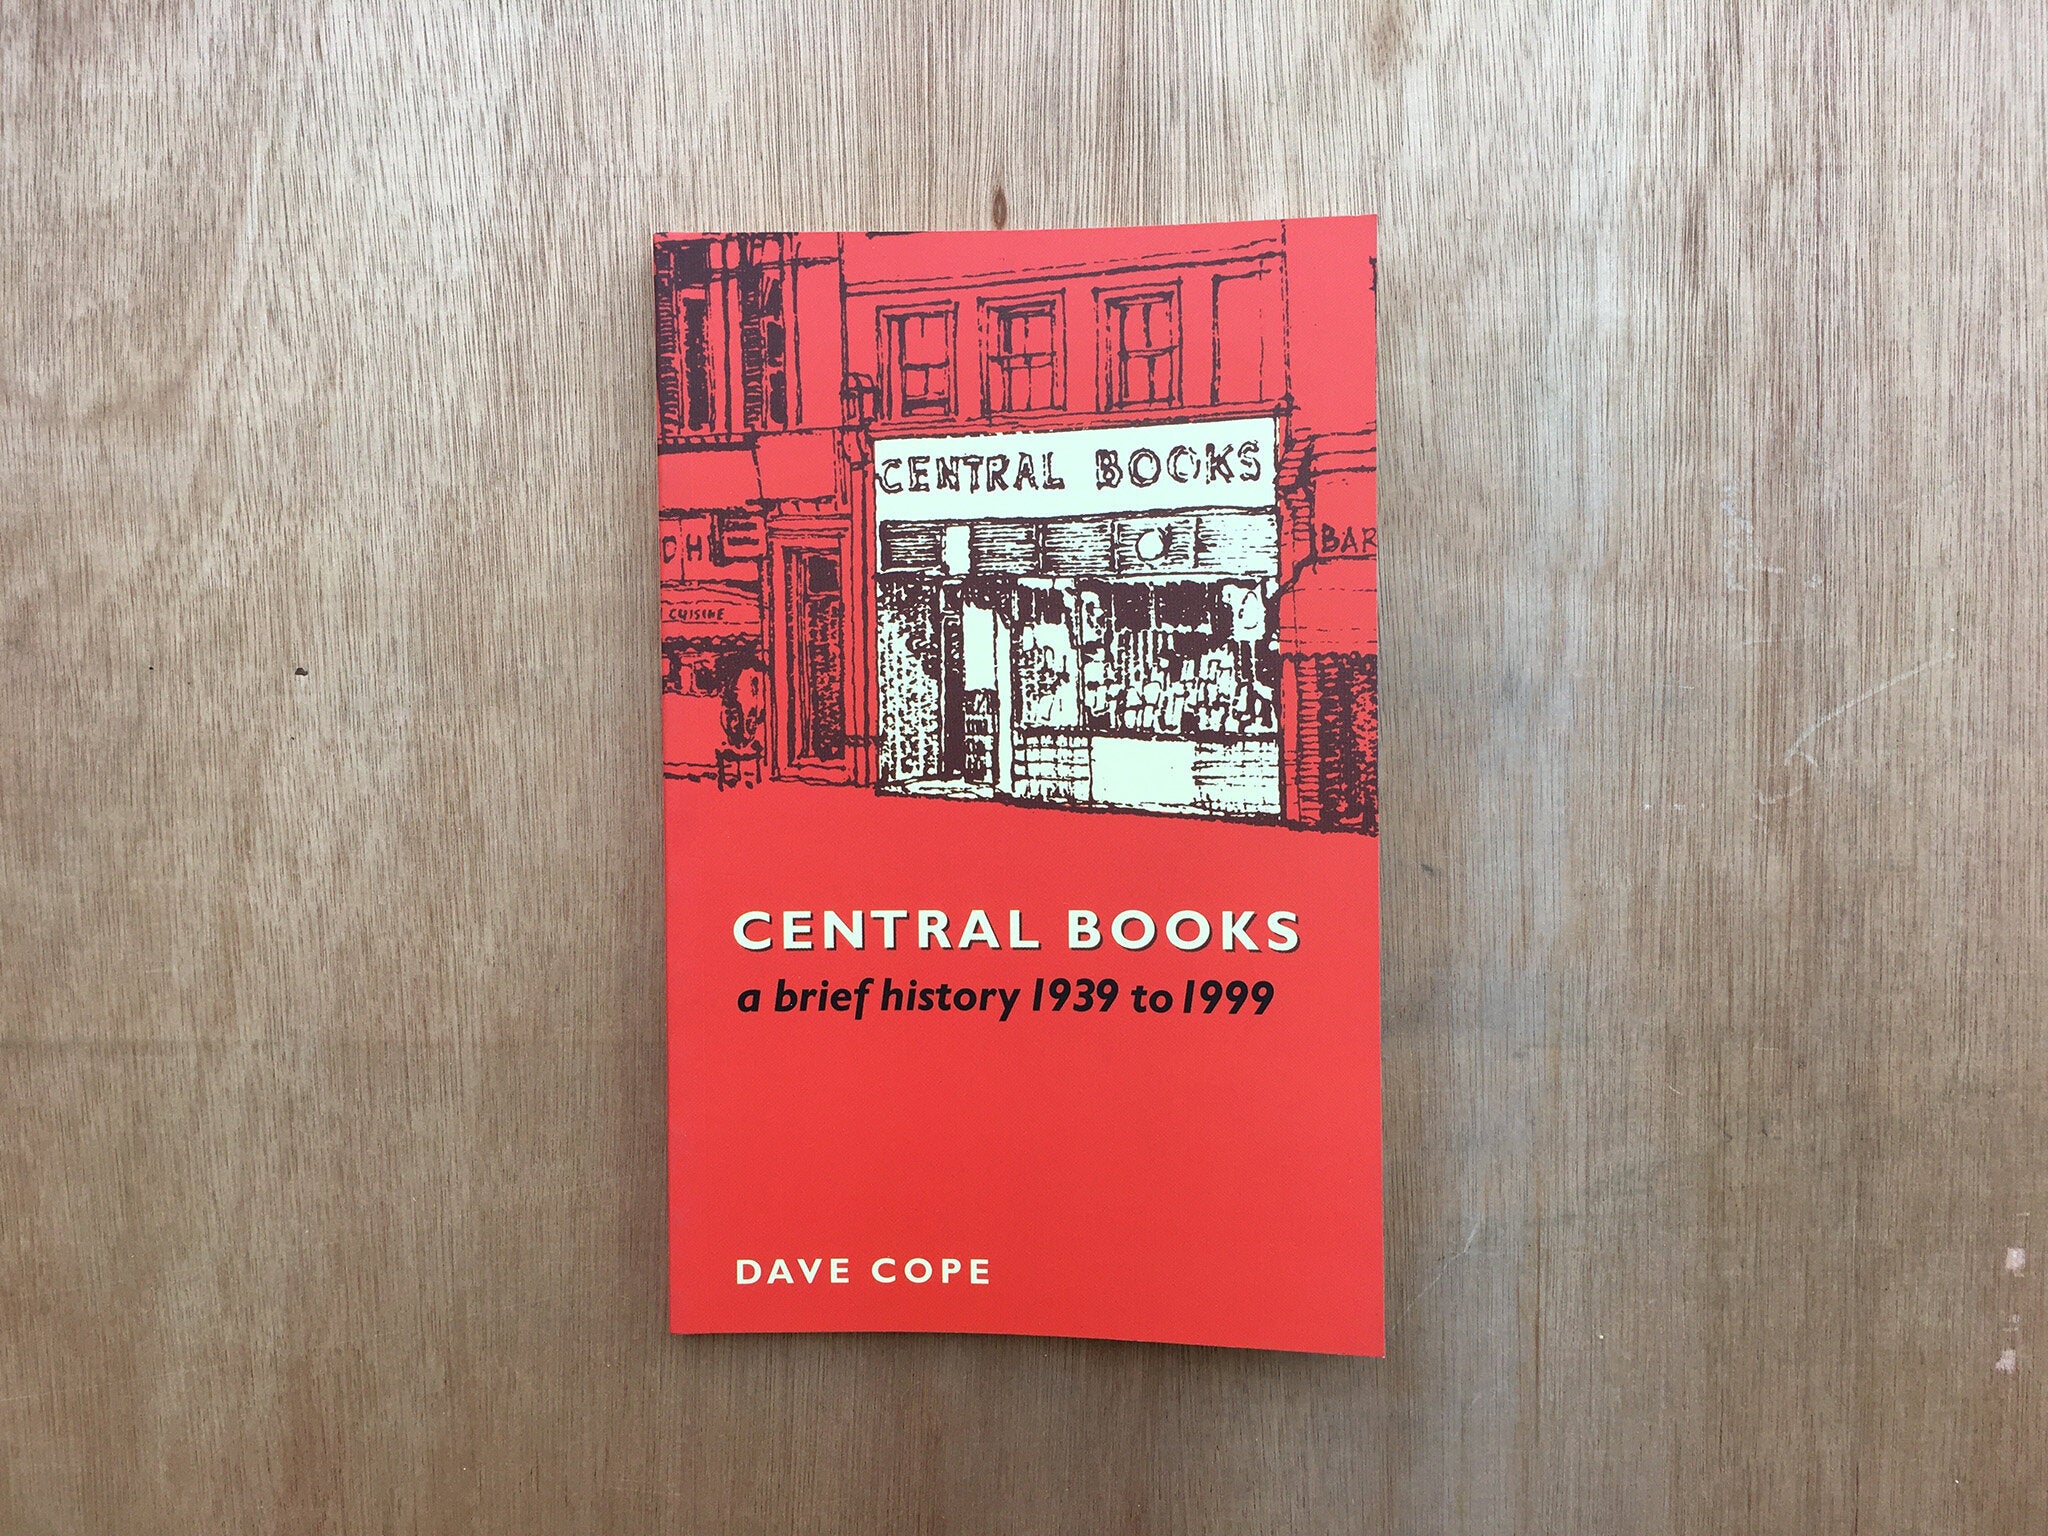 CENTRAL BOOKS: A BRIEF HISTORY 1939 TO 1999 by Dave Cope